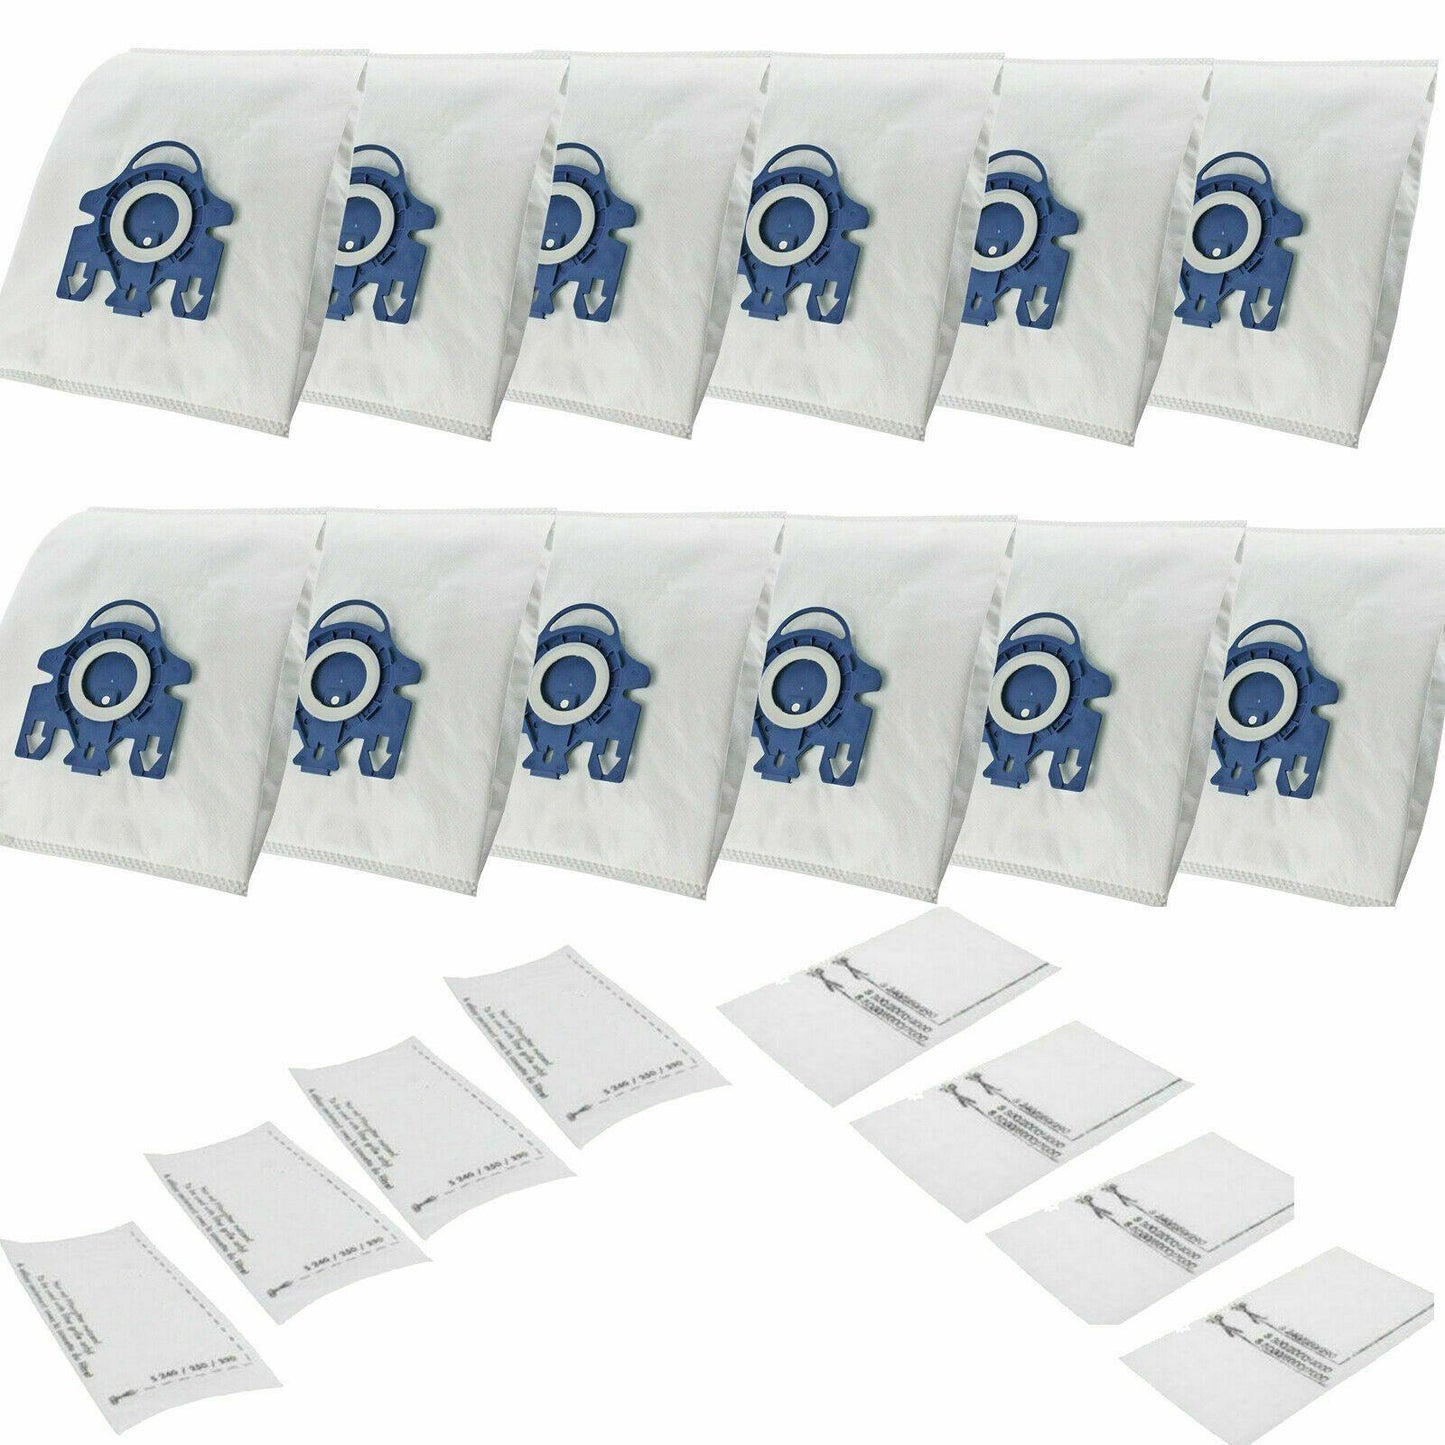 12 Dust Bags & 8 Filters For Miele S5211 S5210 S5220 Vacuum Cleaner Sparesbarn